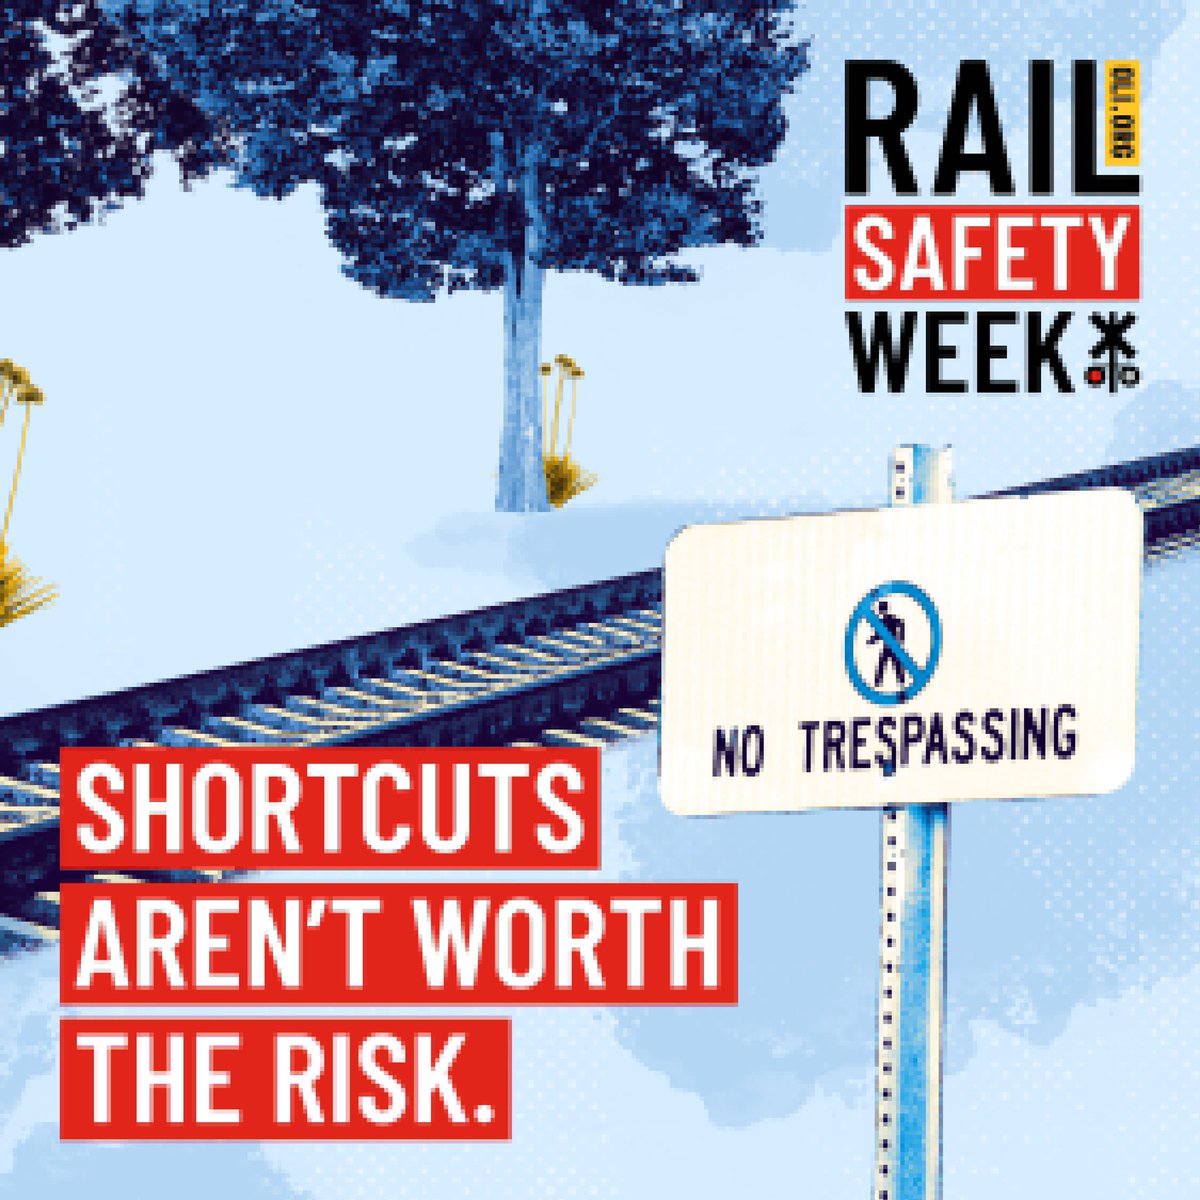 Today's #RailSafetyWeek theme is trespass prevention. Shortcuts aren't work the risk. Never walk on or close to railroad tracks. Help #STOPTrackTragedies!